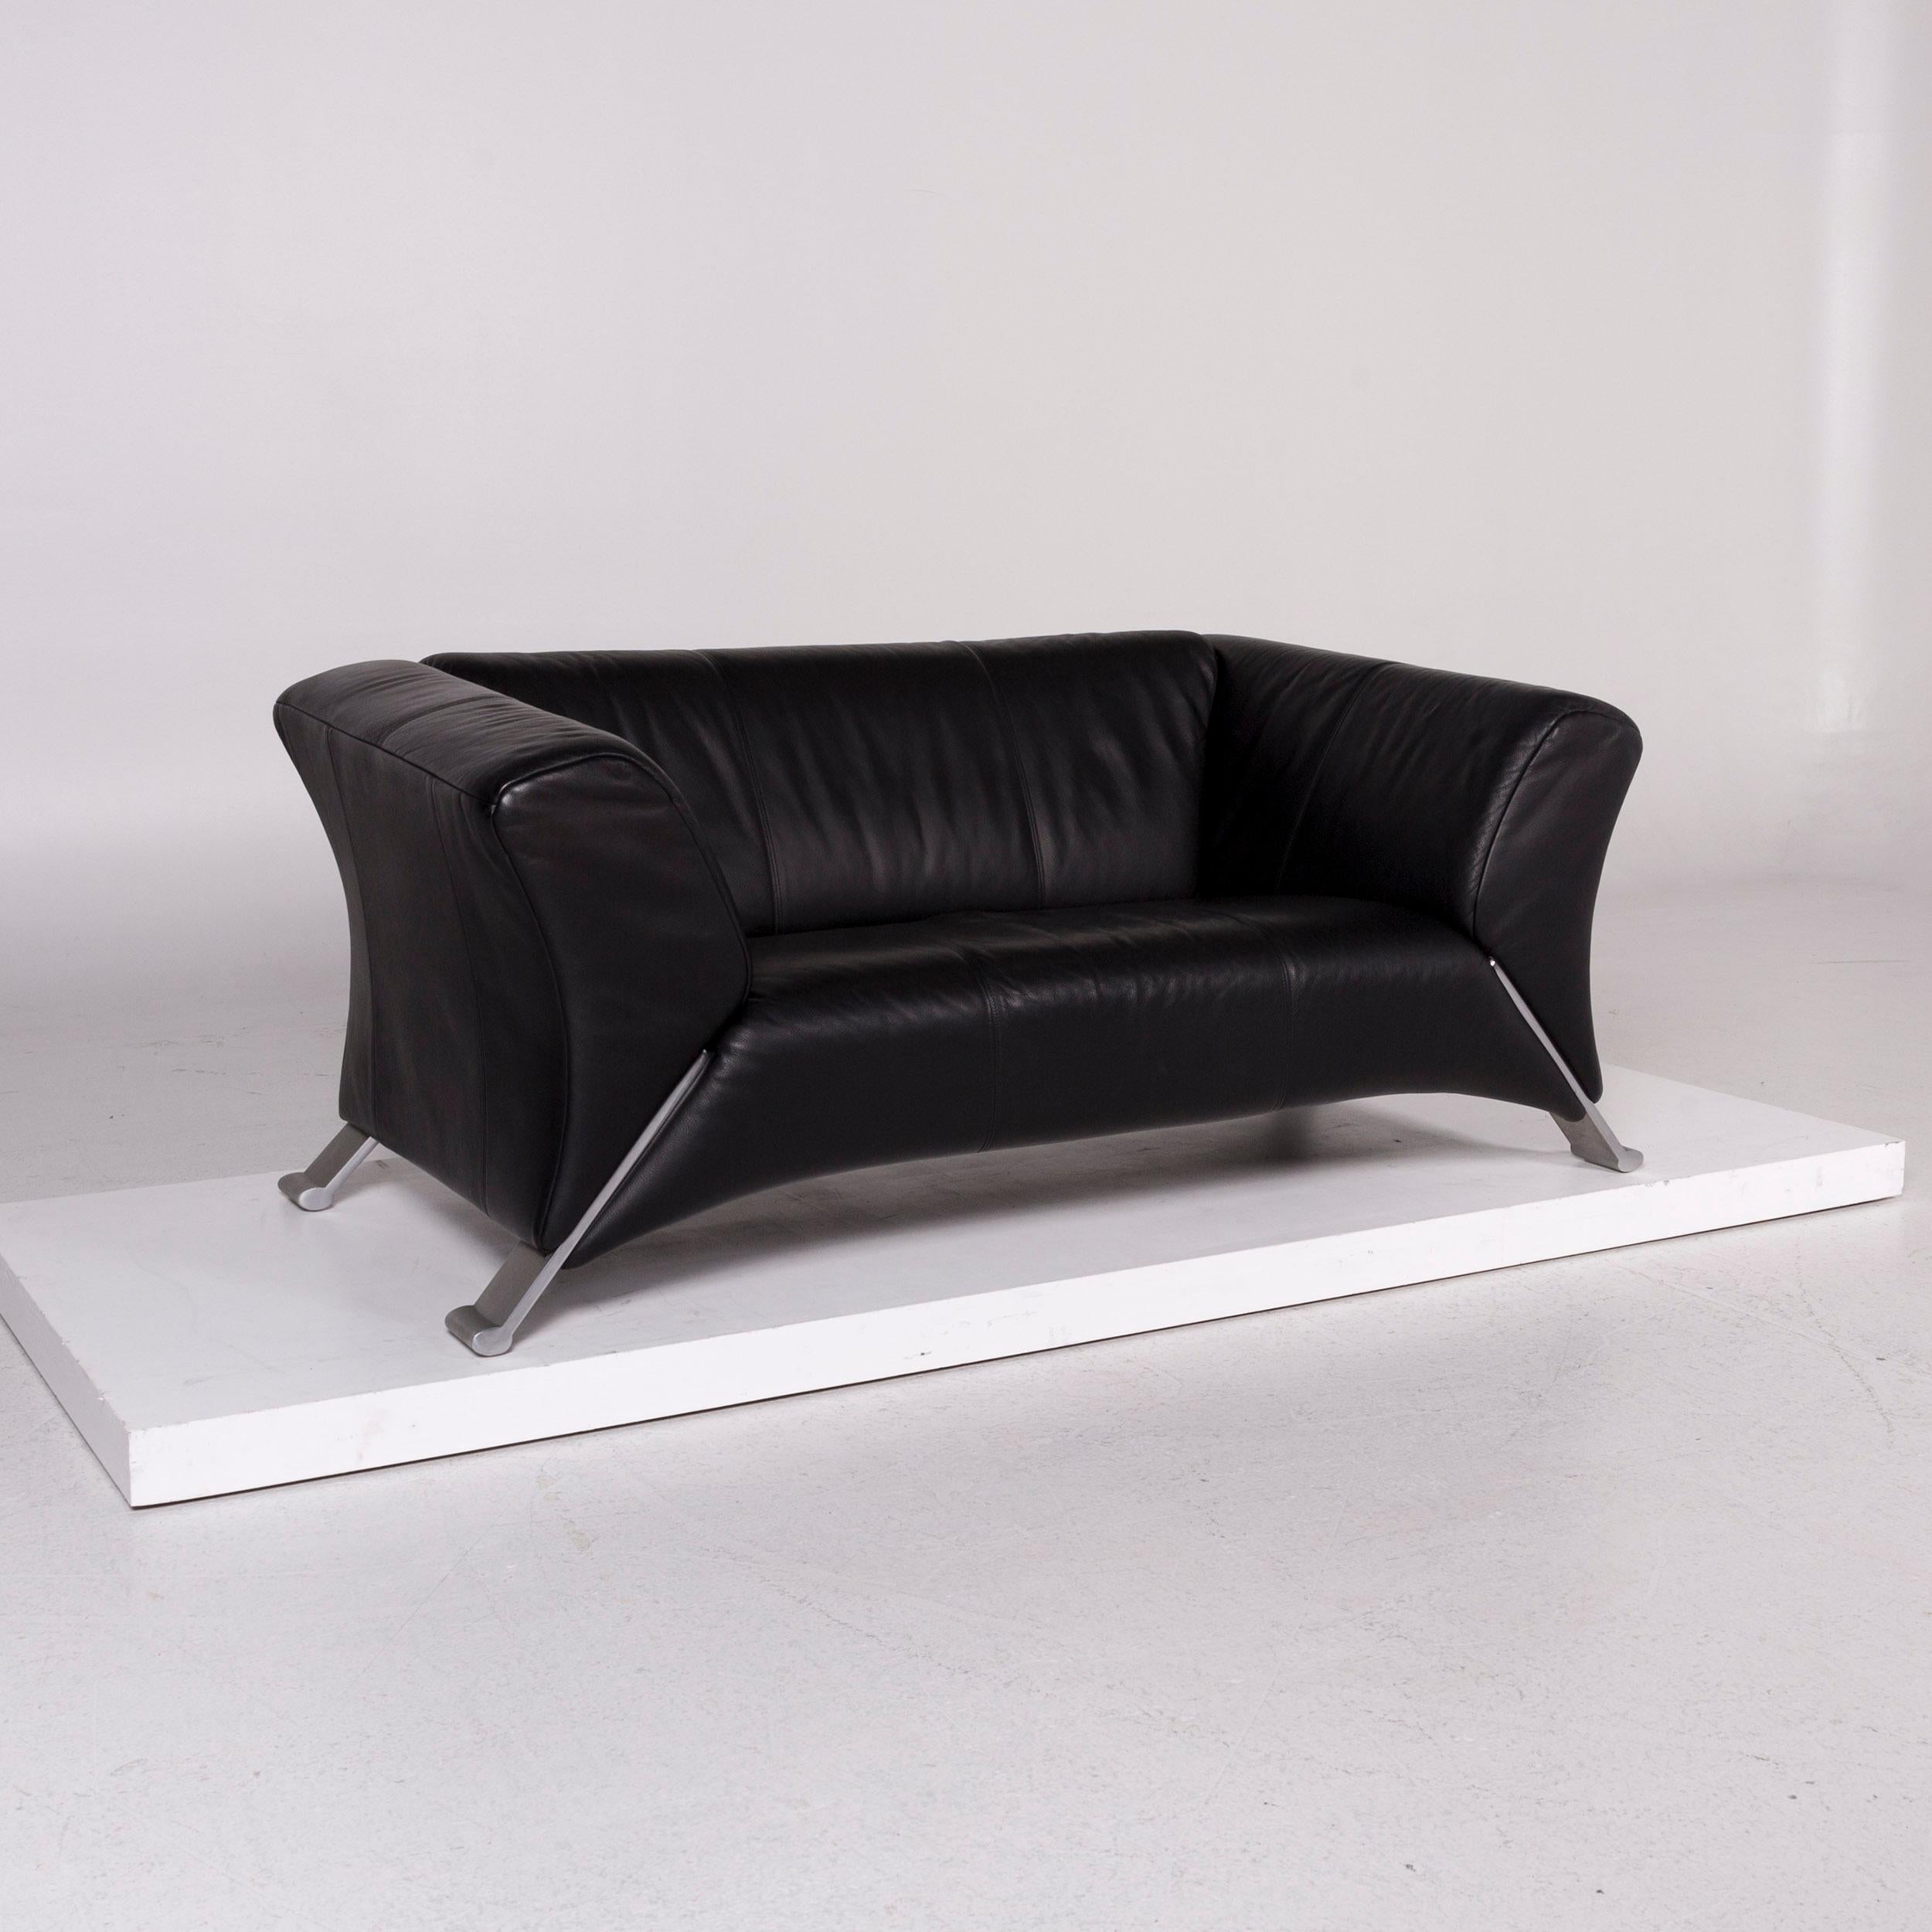 We bring to you a Rolf Benz 322 leather sofa black two-seat couch.

 Product measurements in centimeters:
 

 Depth 88
Width 168
Height 71
Seat-height 38
Rest-height 71
Seat-depth 60
Seat-width 100
Back-height 34.

   